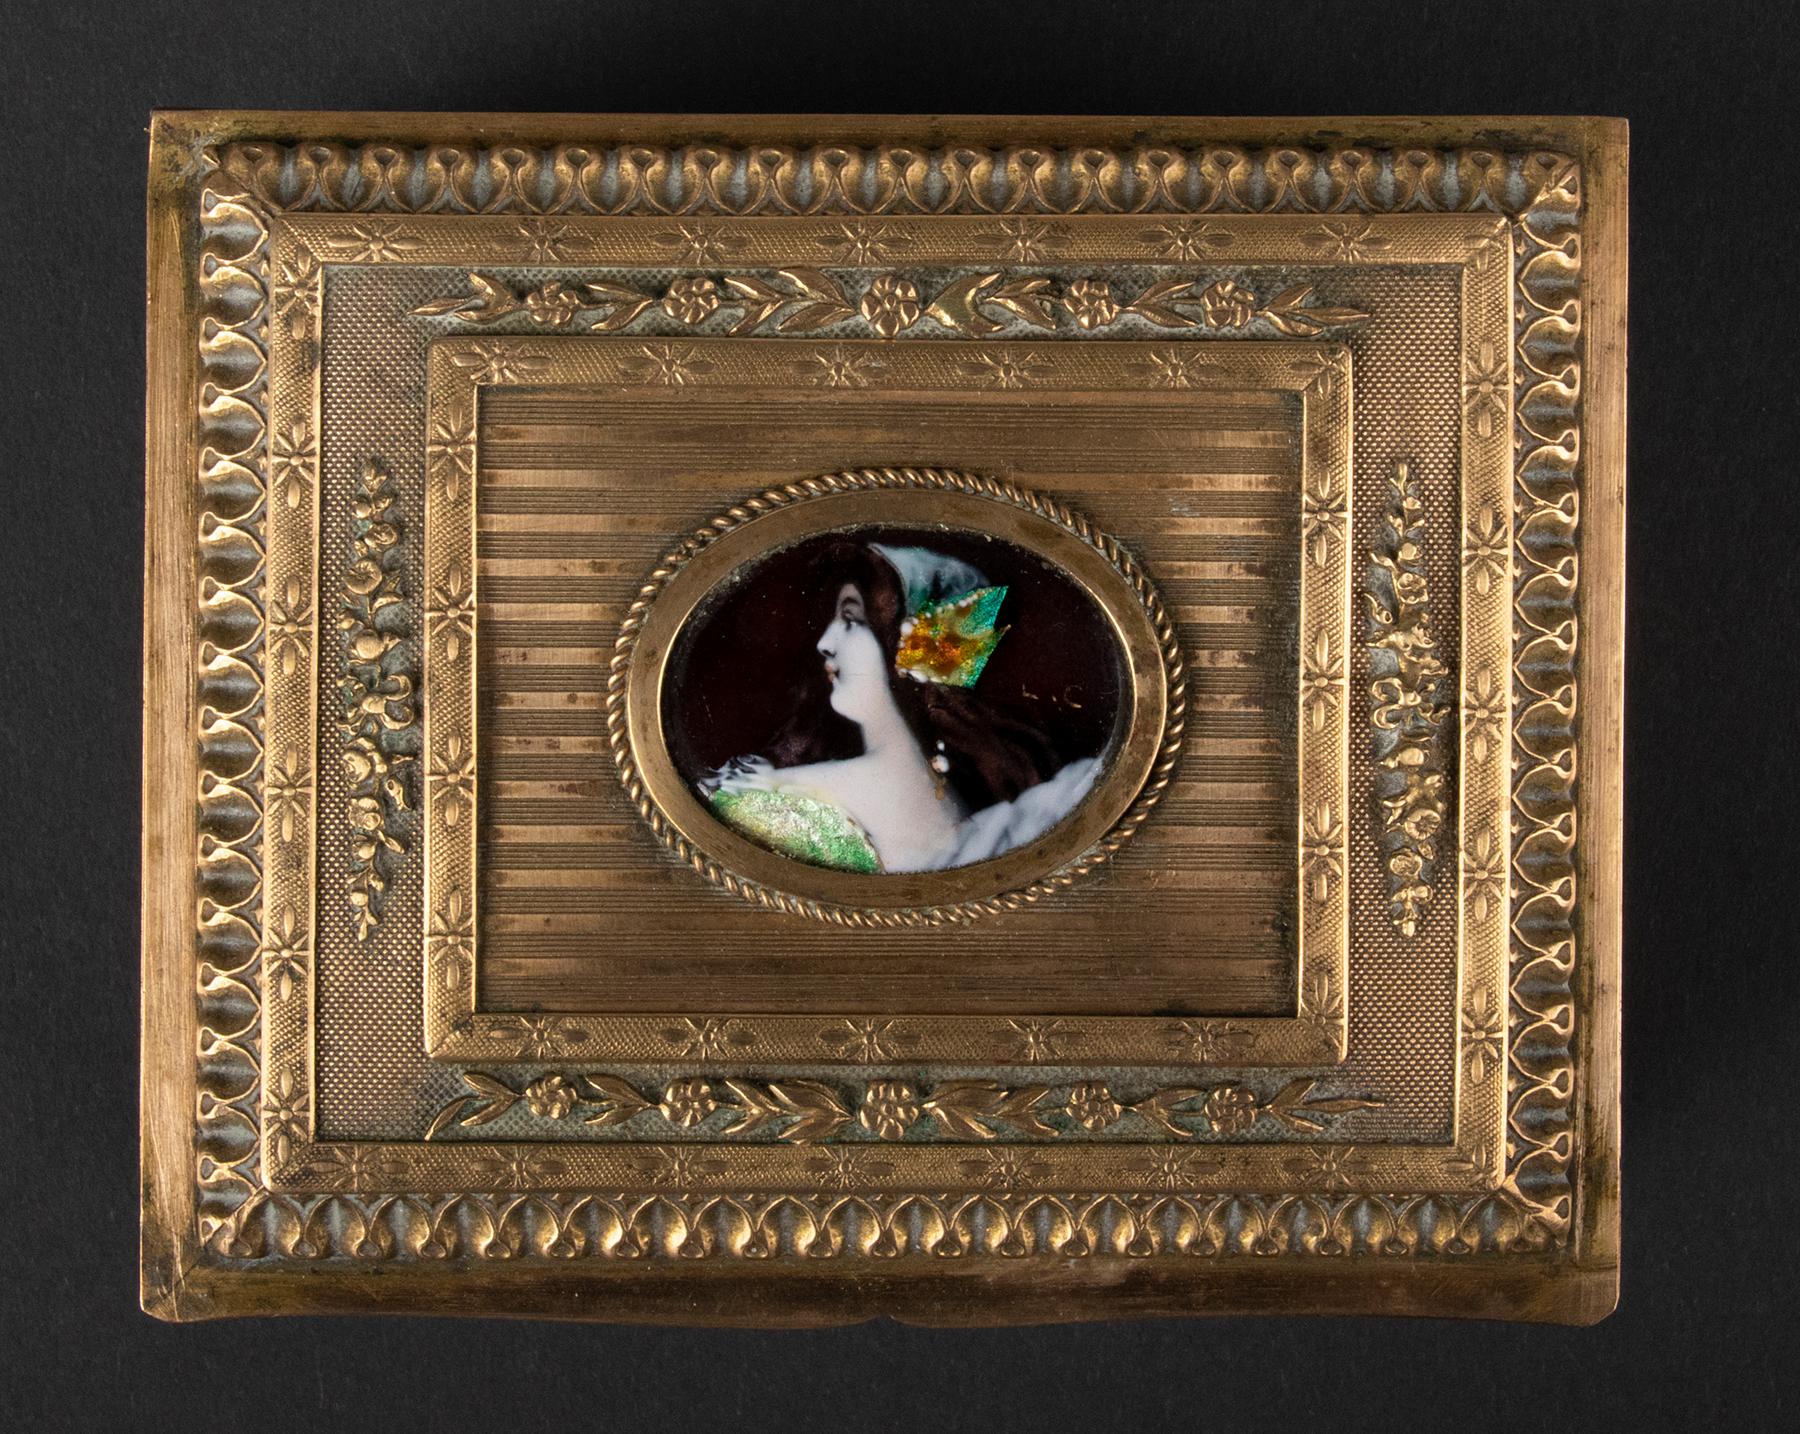 Late 19th Century 19th Century Jewelery Box by JP Legastelois, Bronze with Mother of Pearl